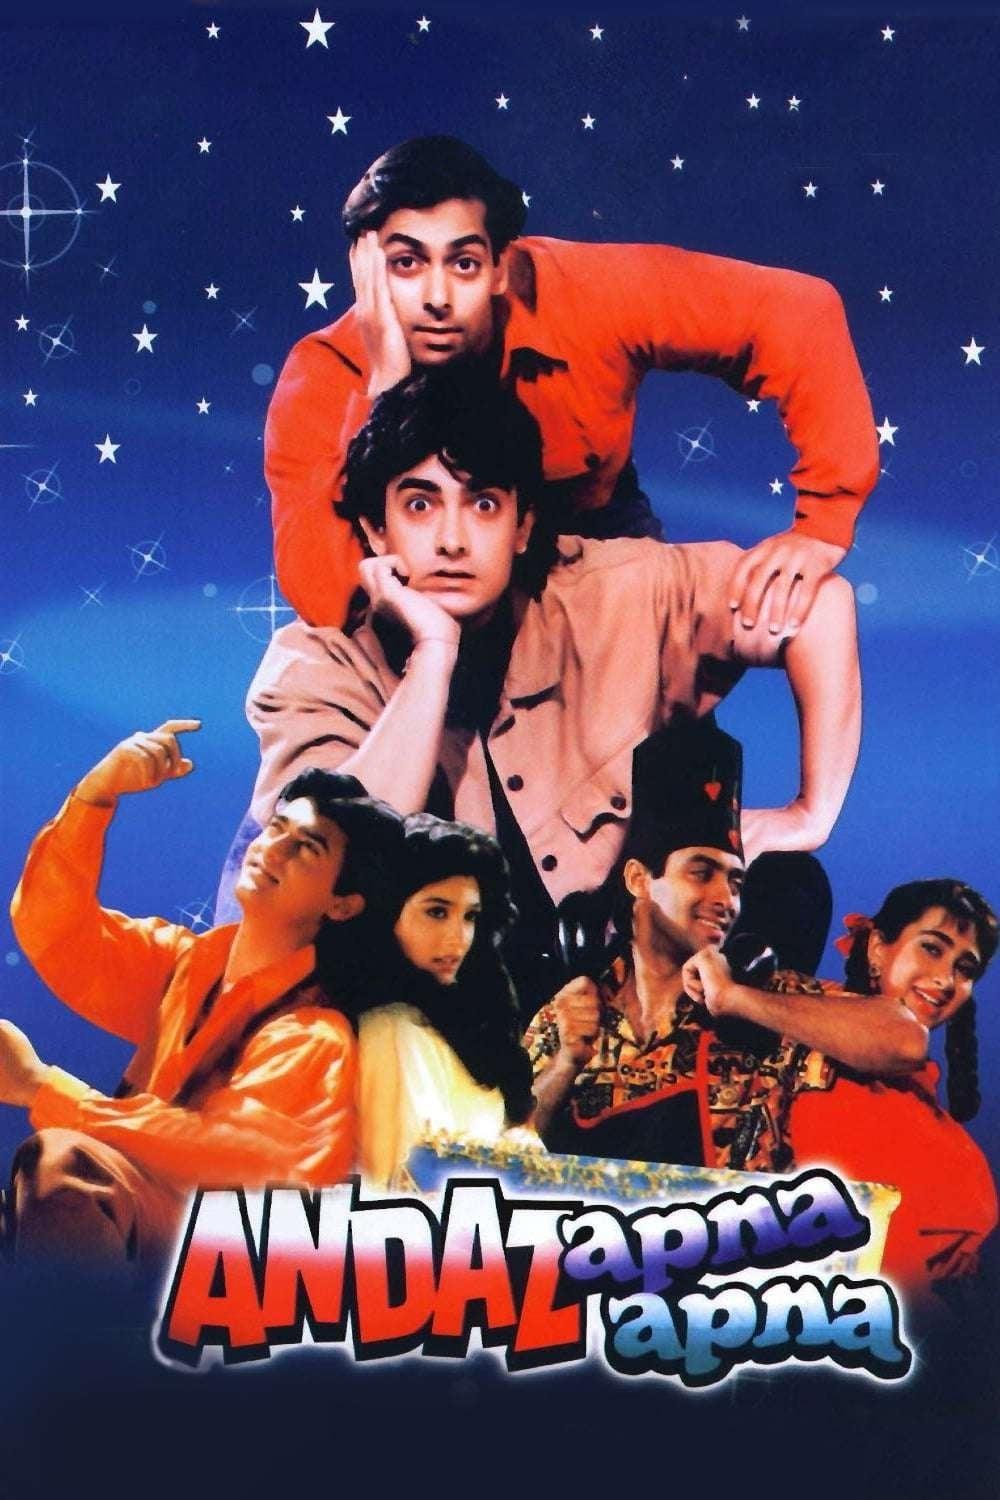 In this comedy classic, Salman Khan's 'Prem' was a departure from his usual romantic roles. He creates hilarious chemistry with Aamir Khan. His comedic timing made this film a fan favorite.